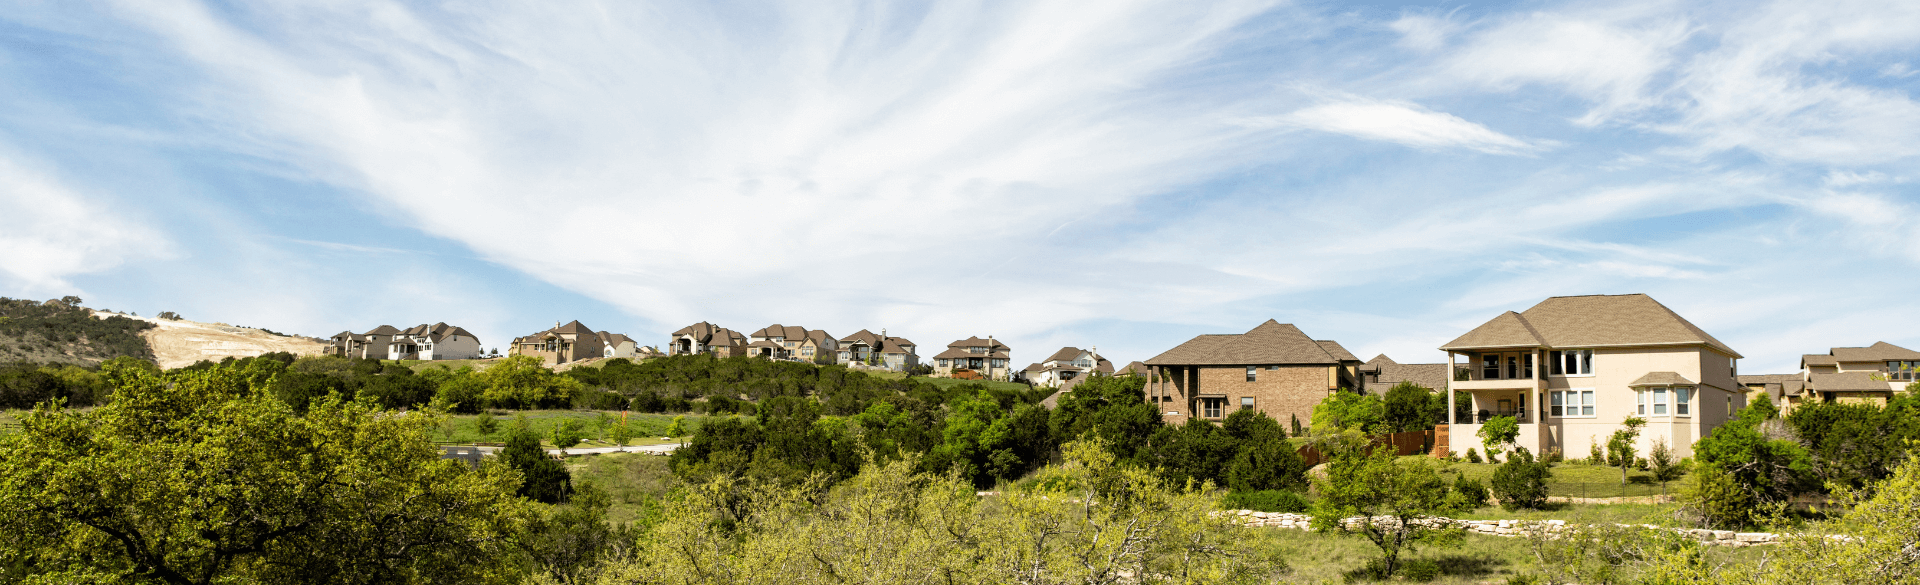 homes-with-valley-view-sweetwater-austin-tx.png